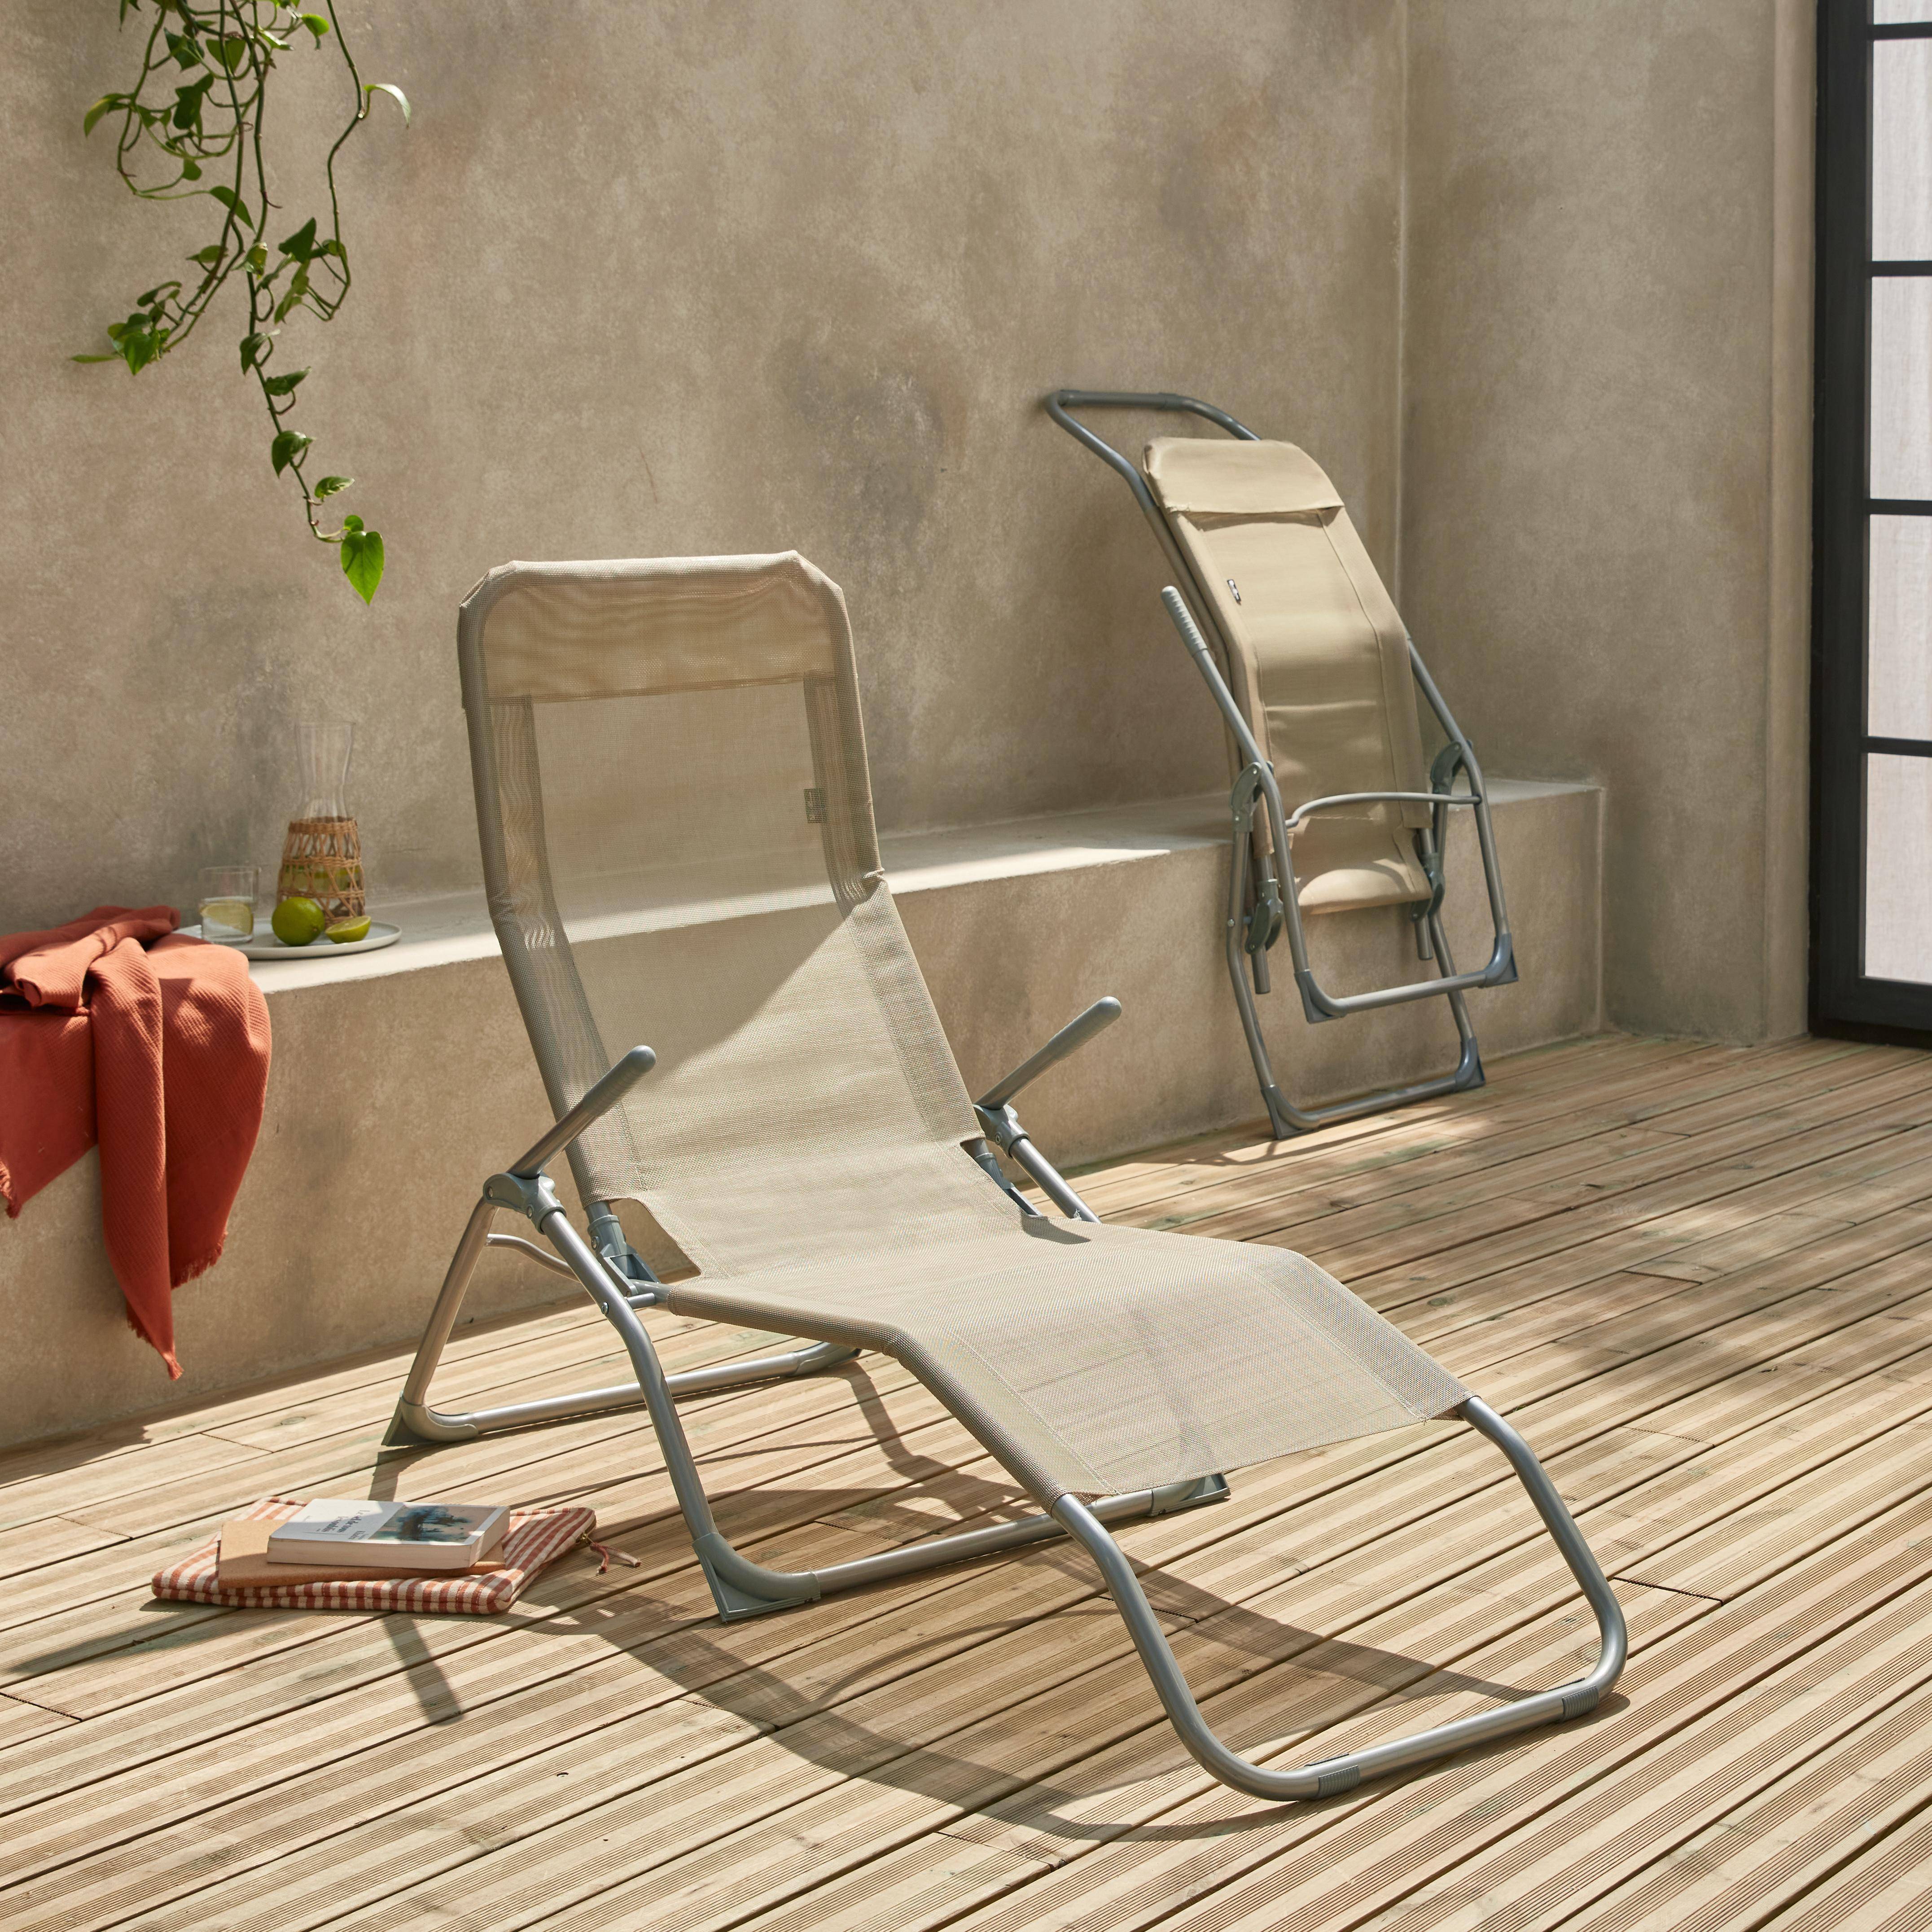 Set of 2 textilene sun loungers - 2 positions - Levito - Taupe Photo2